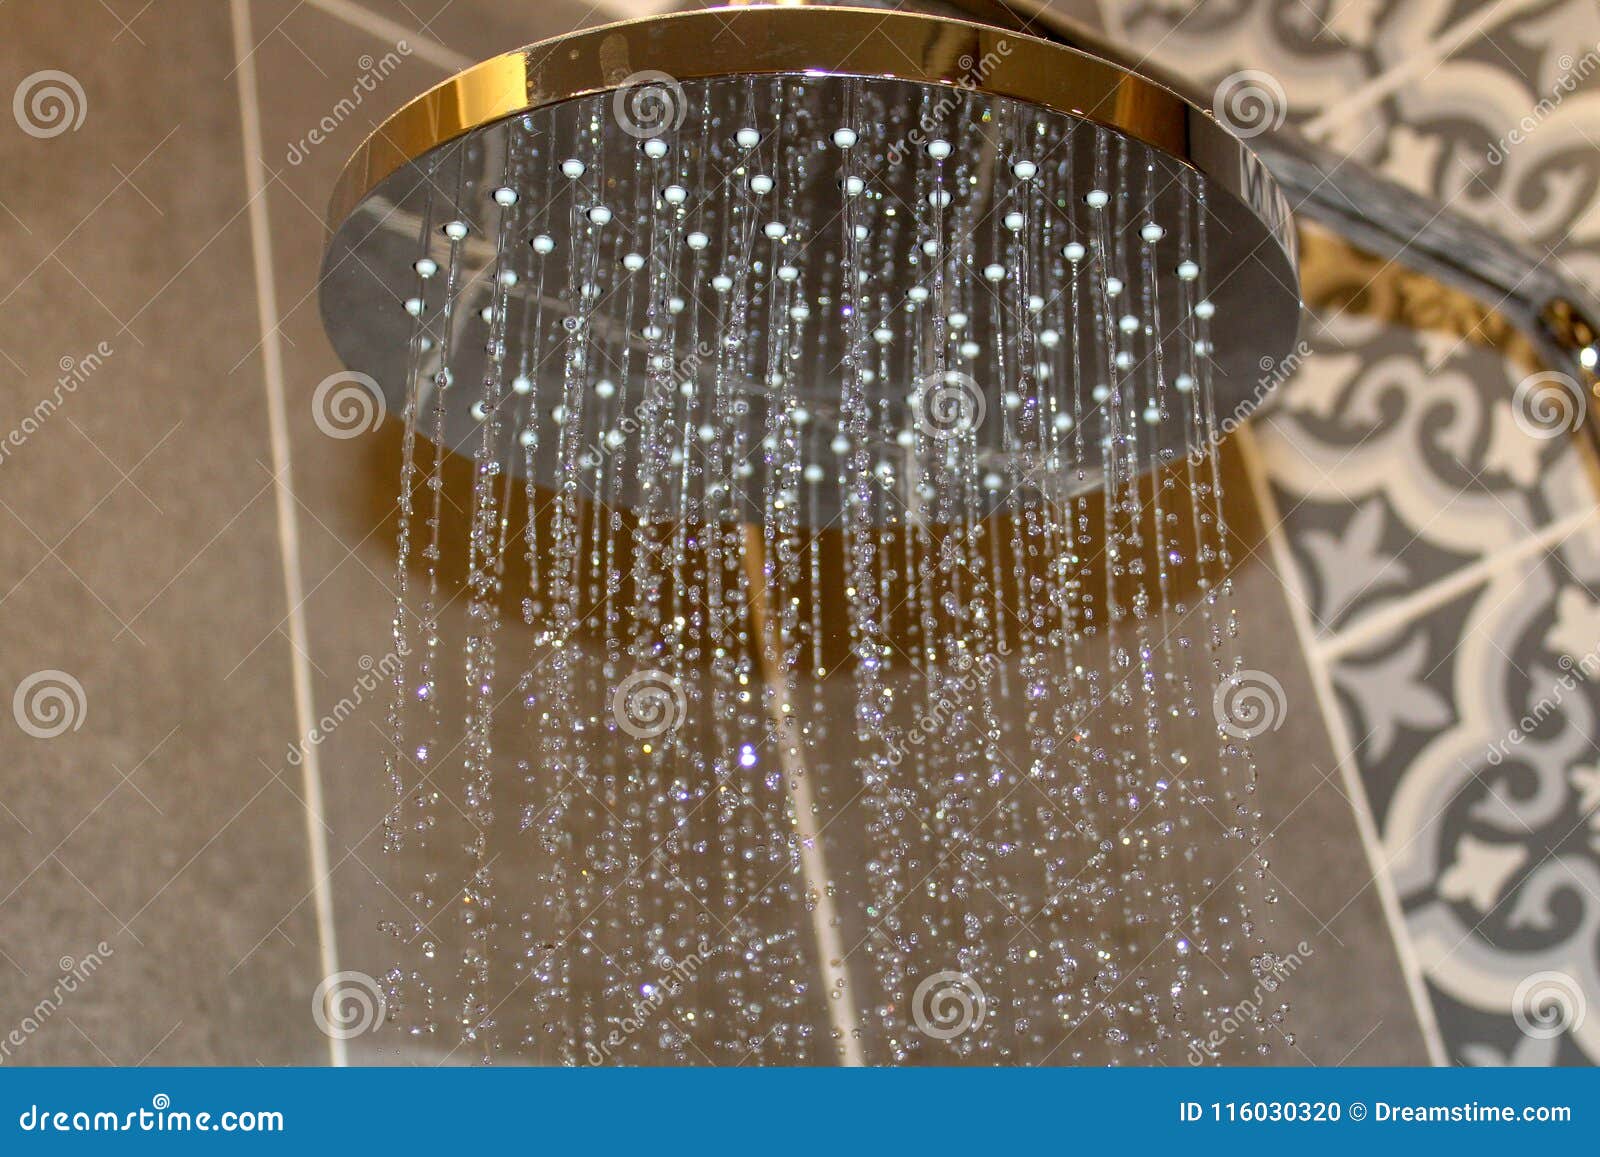 Water Coming Out Of A Shower Head Stock Photo Image Of